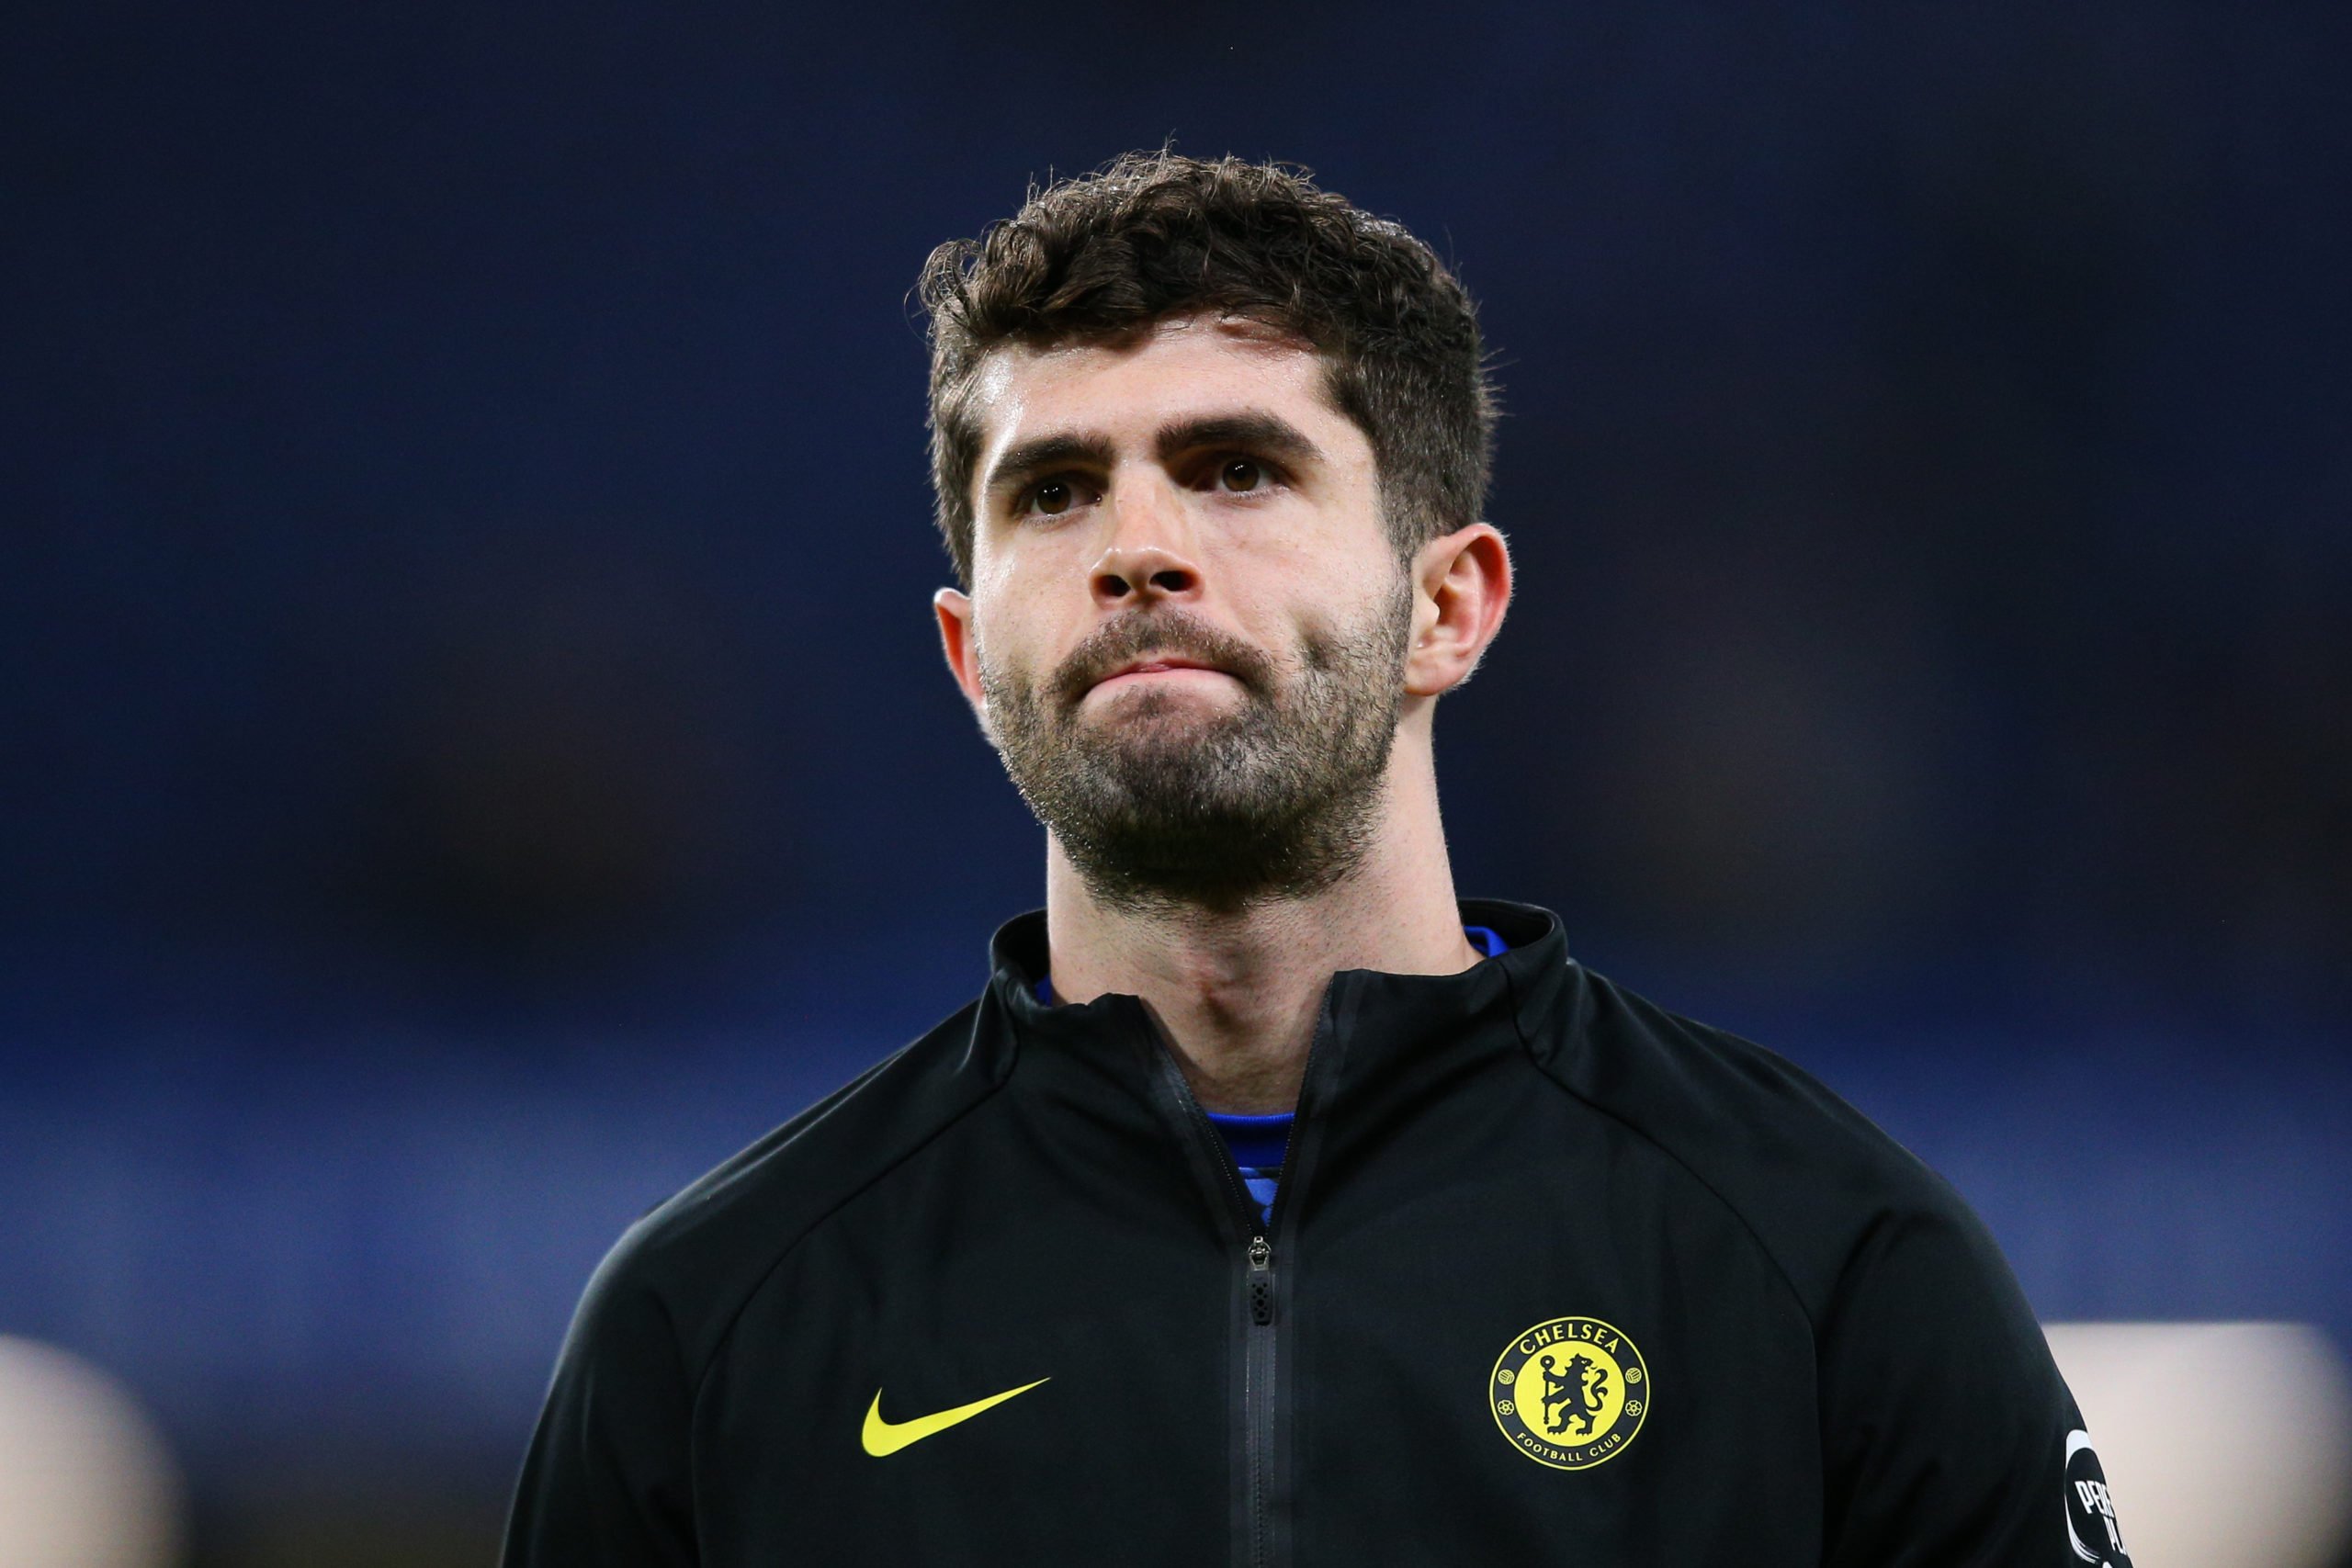 ‘Cloud cuckoo land’: ESPN pundit thinks there is no chance Liverpool would sign £58m Chelsea man